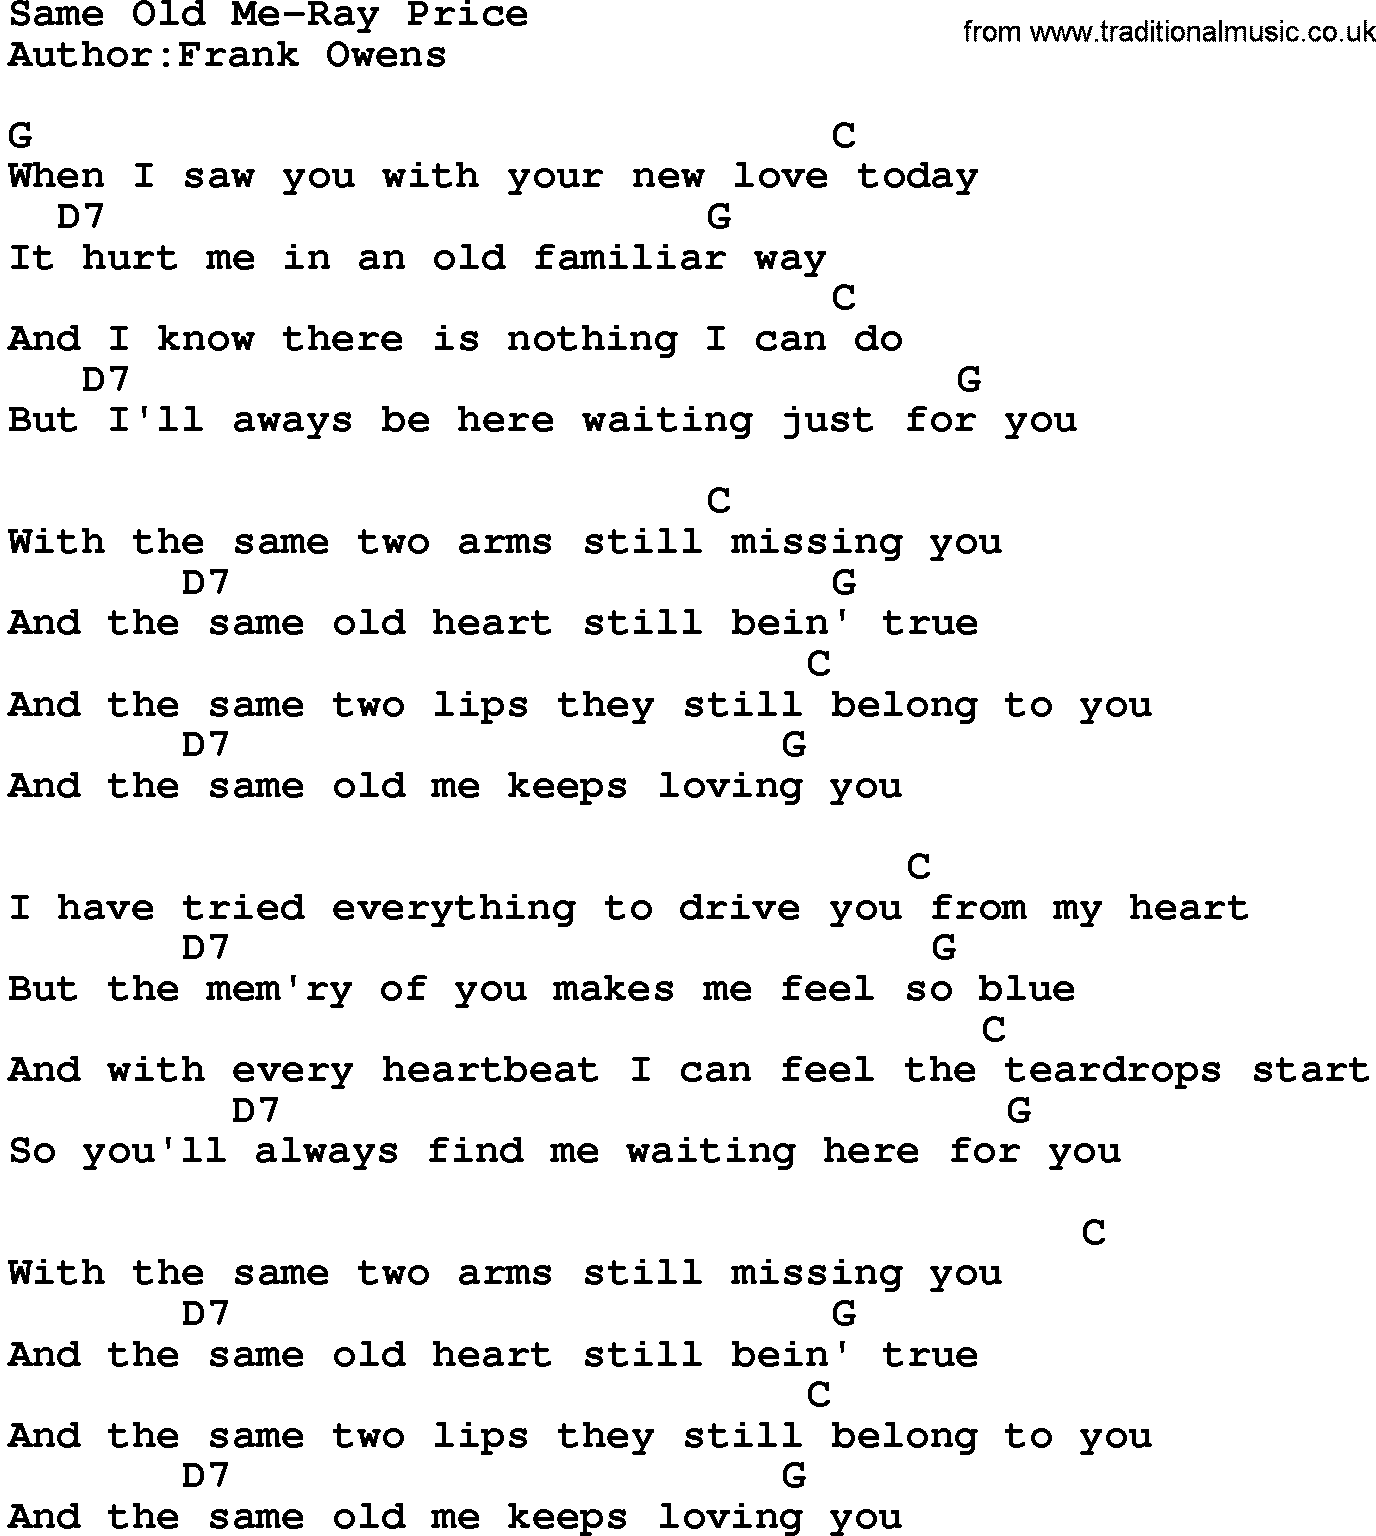 Country music song: Same Old Me-Ray Price lyrics and chords